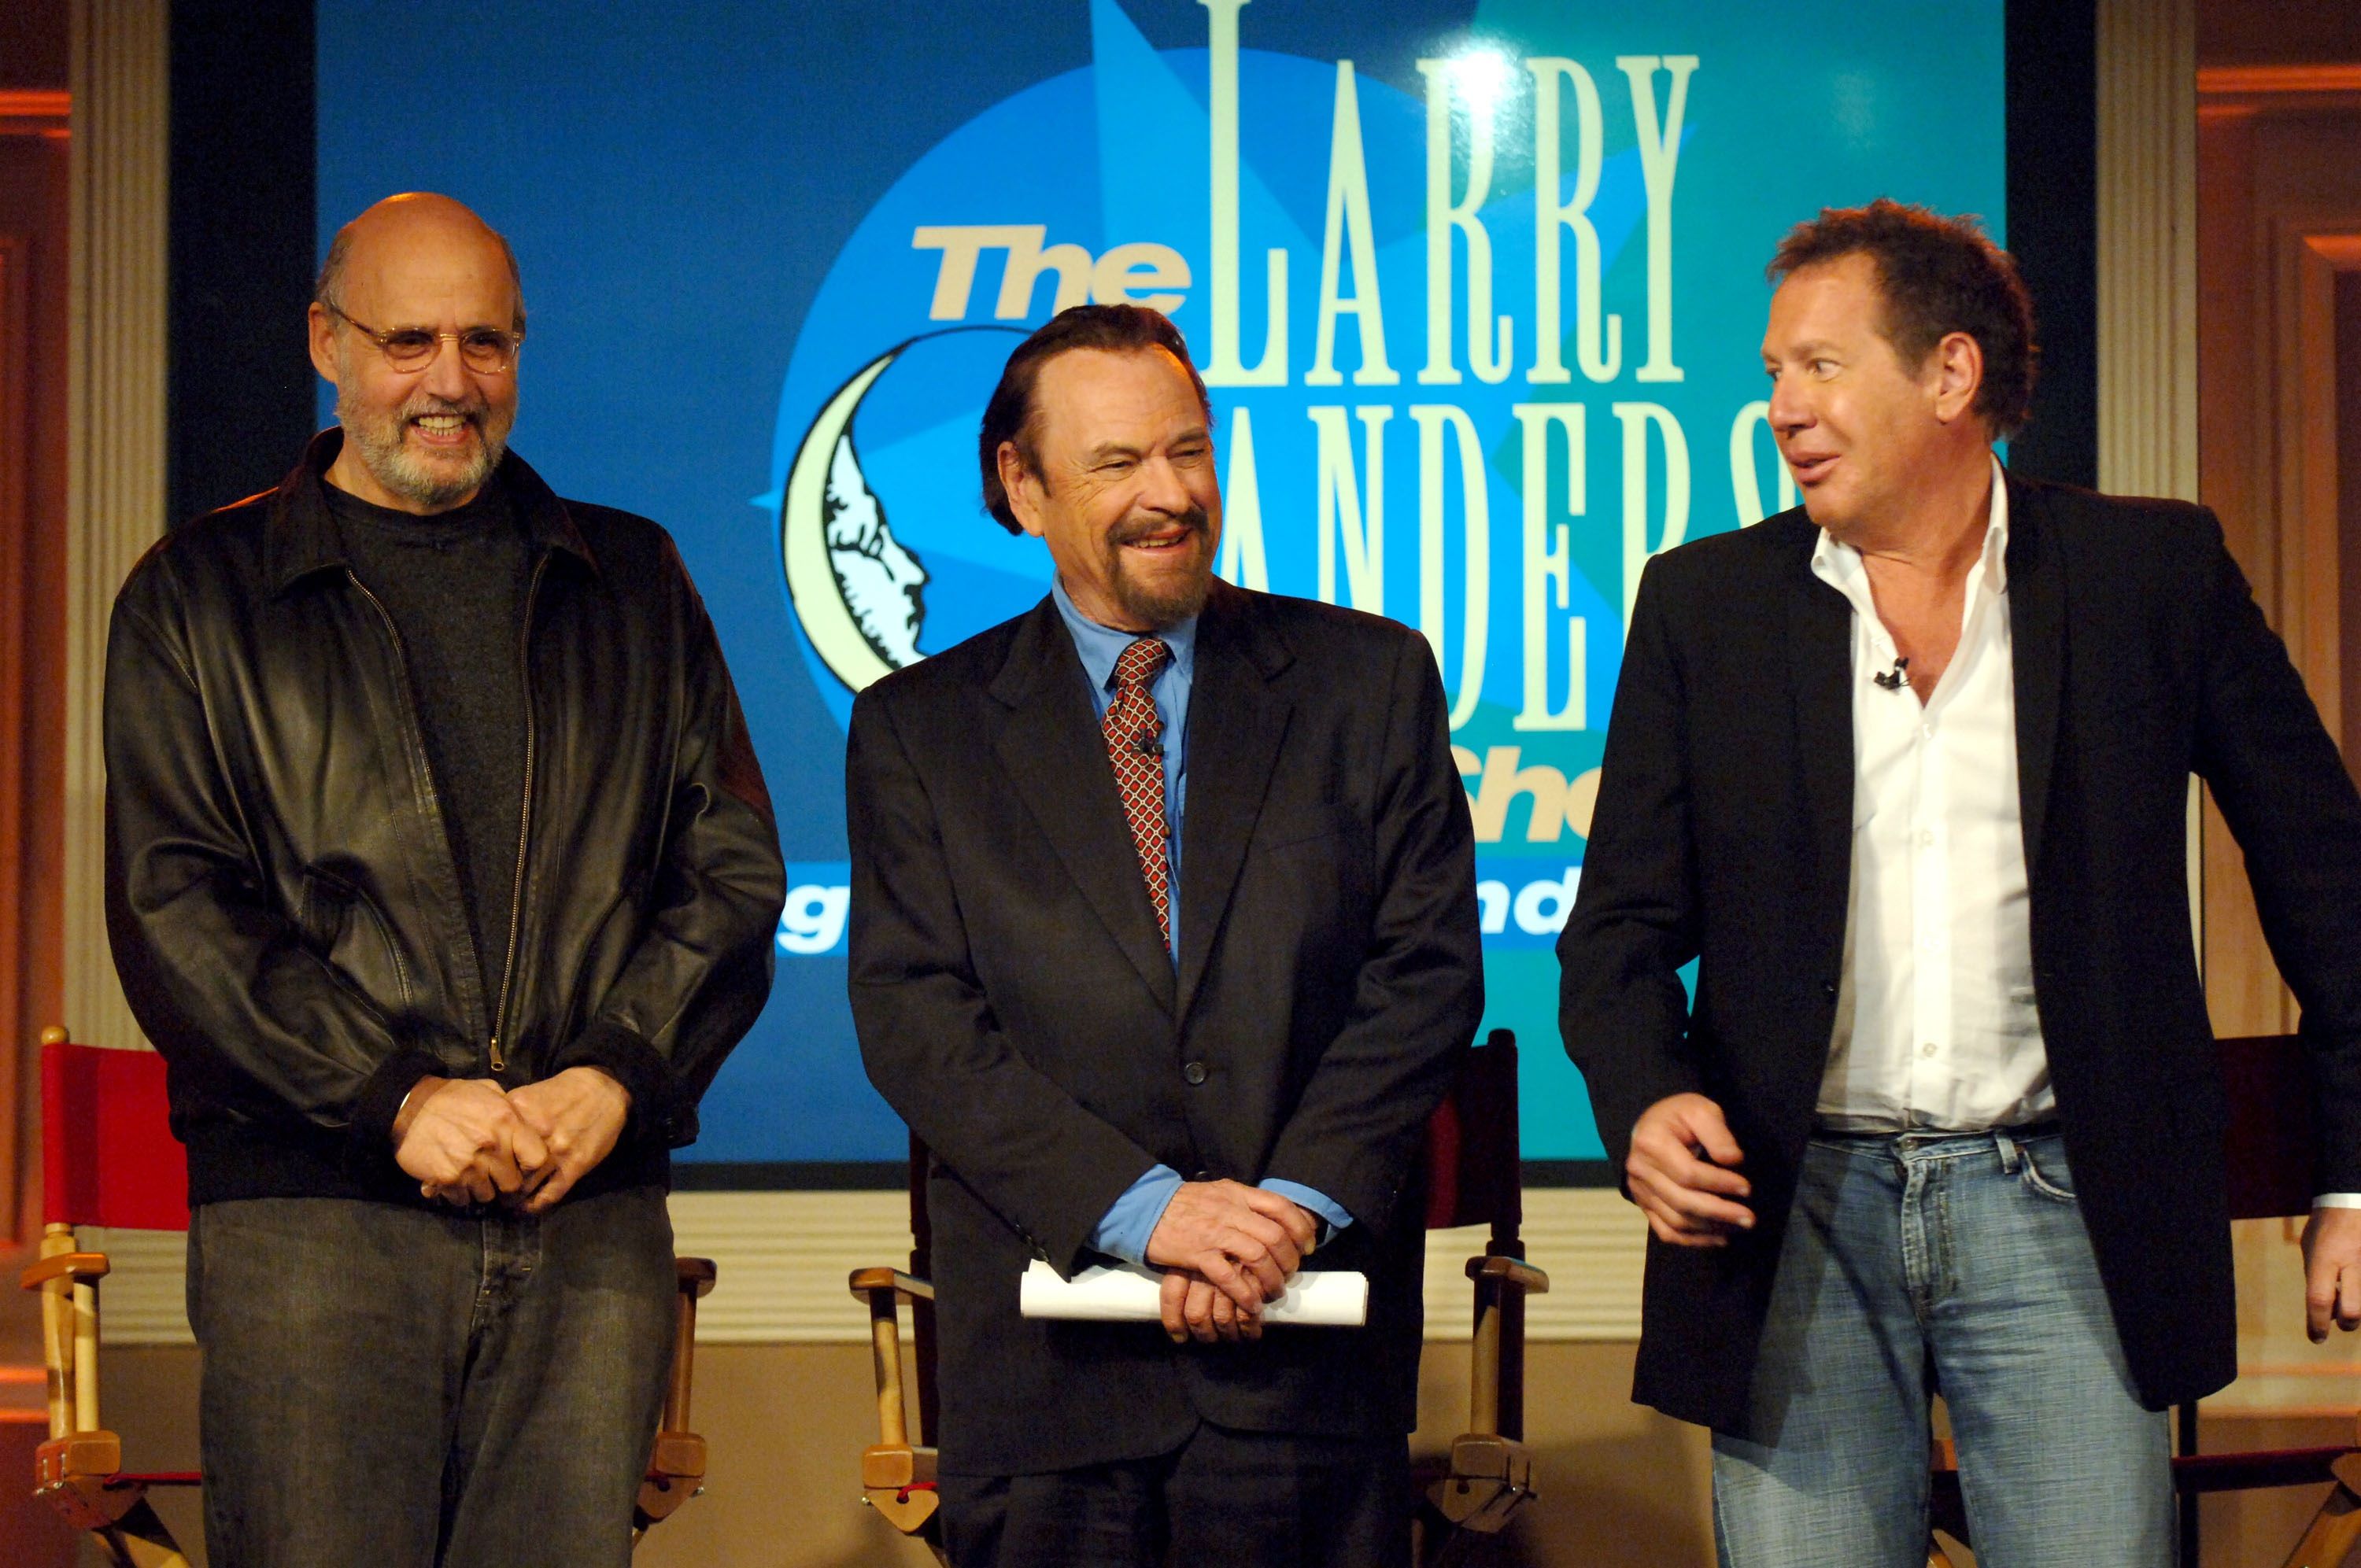 Garry Shandling – legendary comedian and star of The Larry Sanders Show –  dies at 66